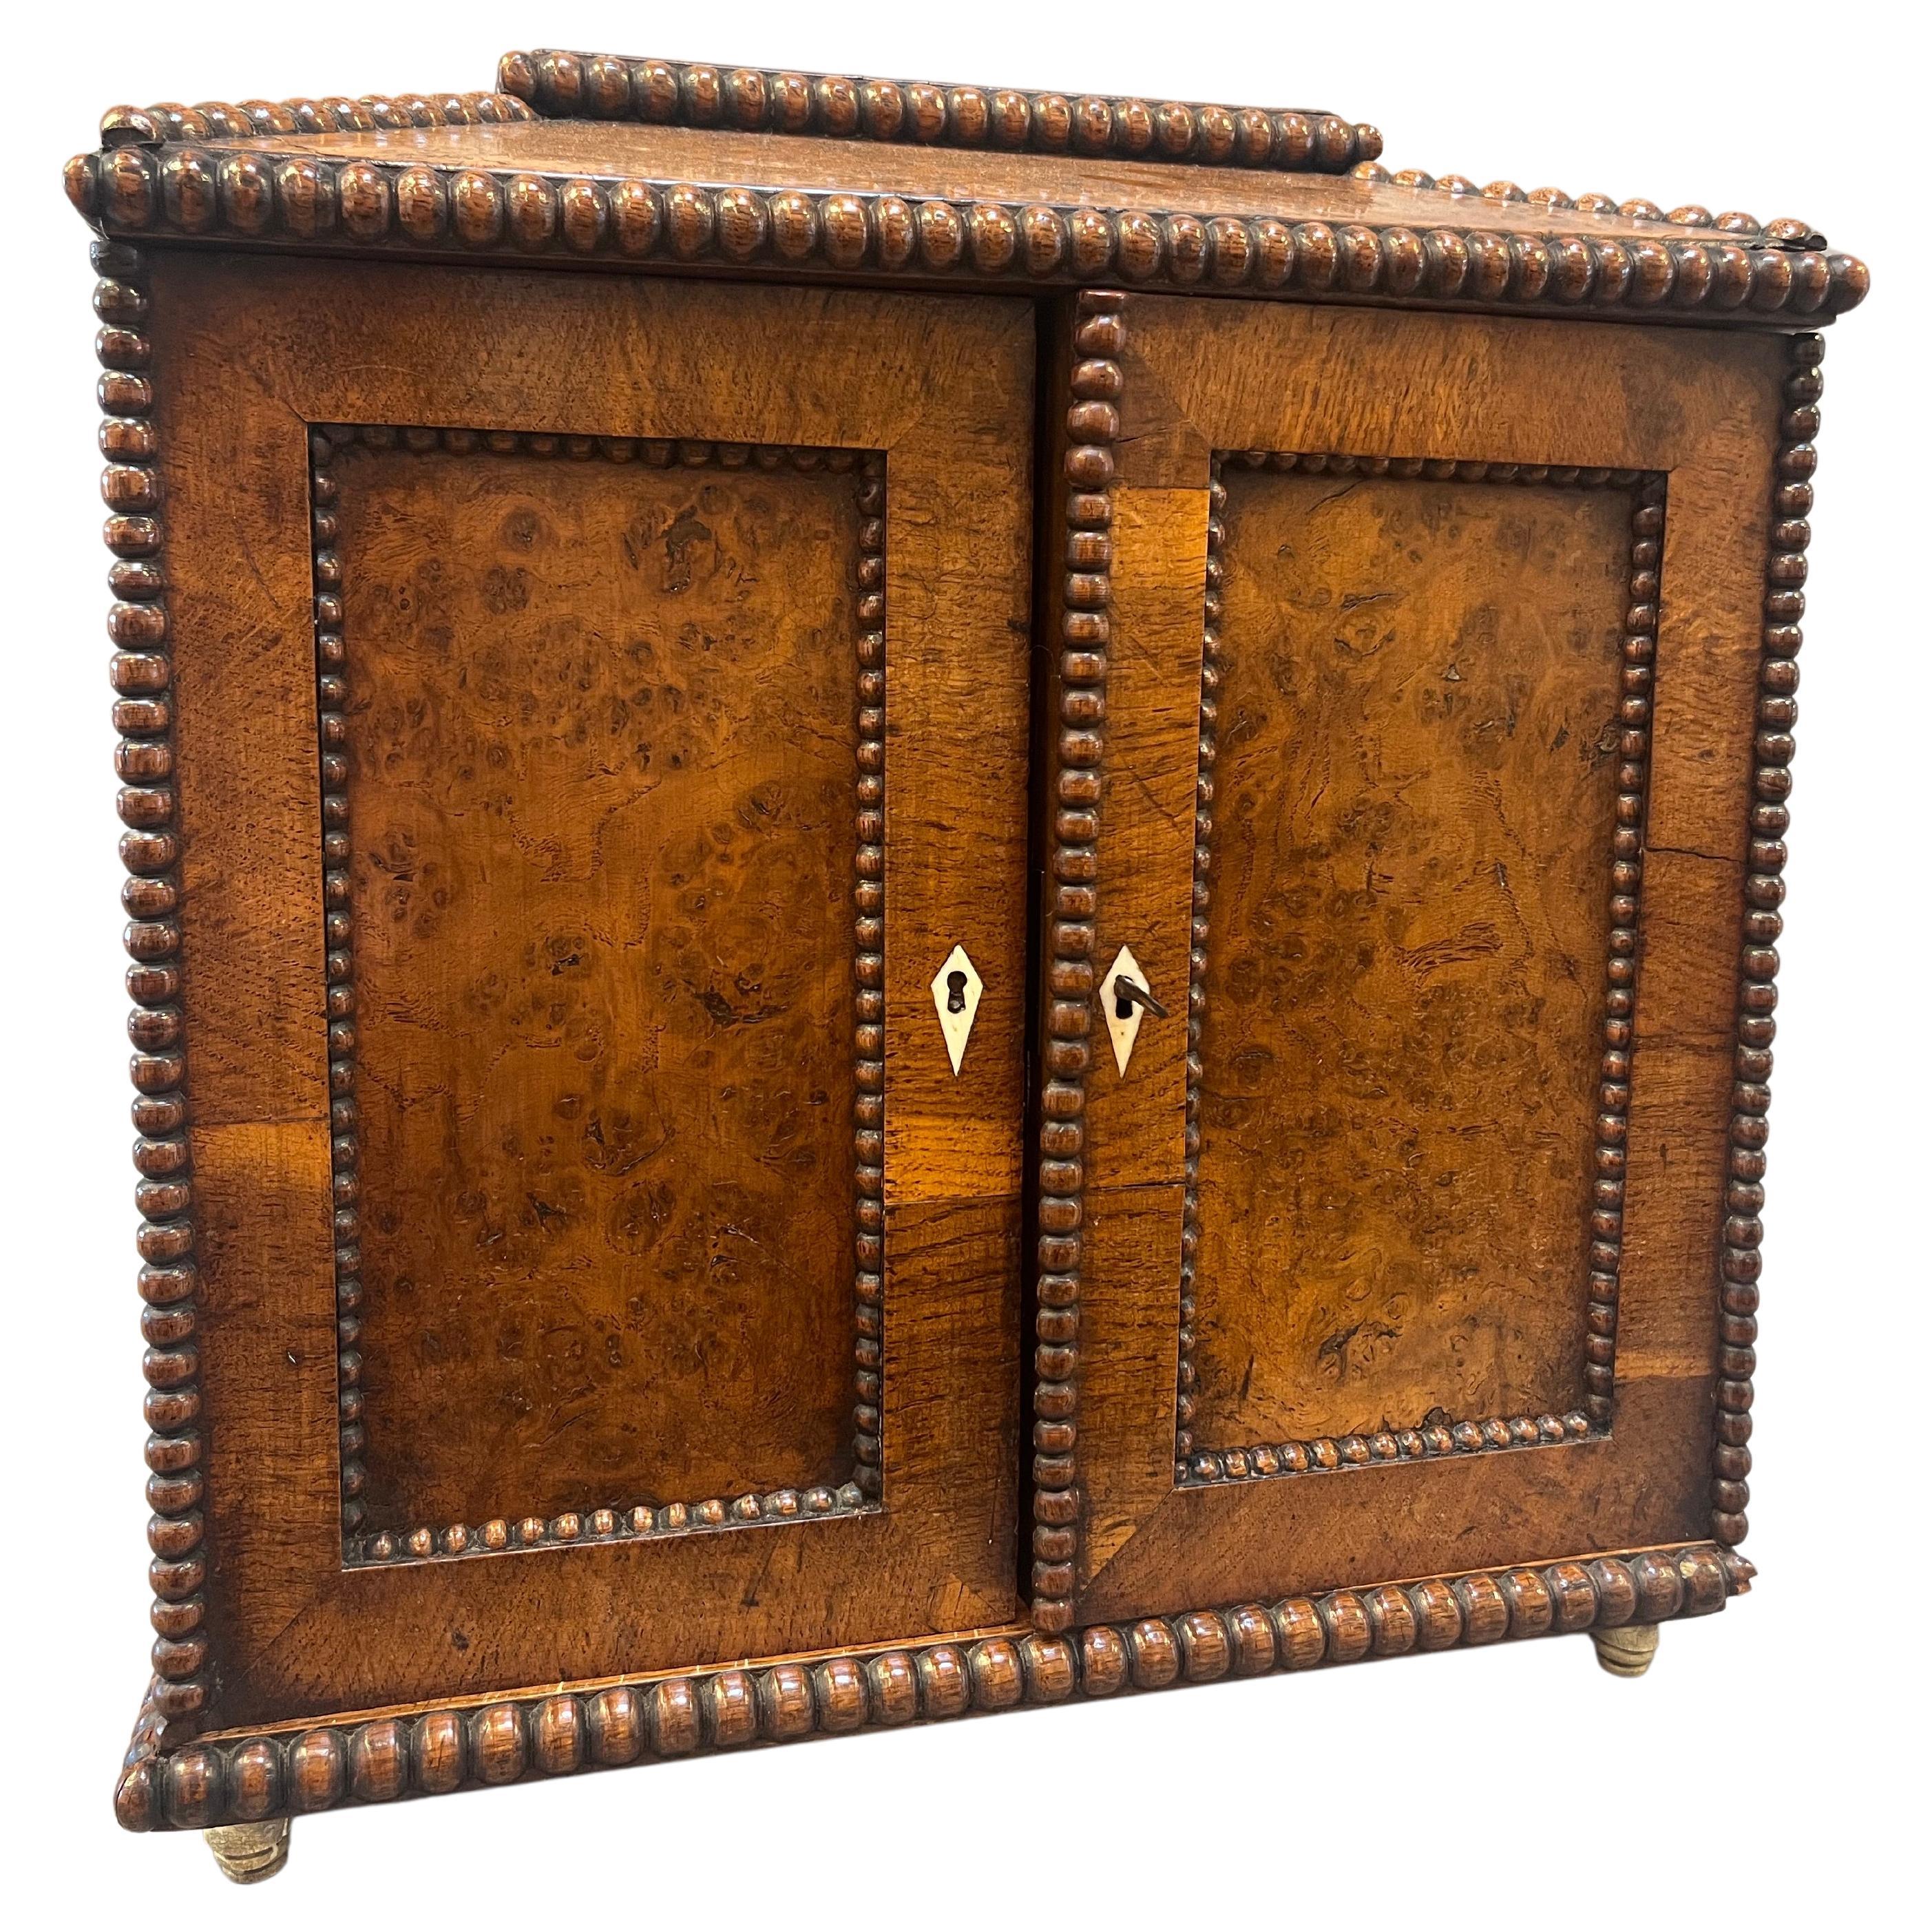  Extraordinary Regency Period English Silver Chest.  Burled “Pollard” Oak panels framed with delicate turned beaded mouldings and two burled doors concealing three burled drawers with bone handles, A paneled top conceals another compartment. In